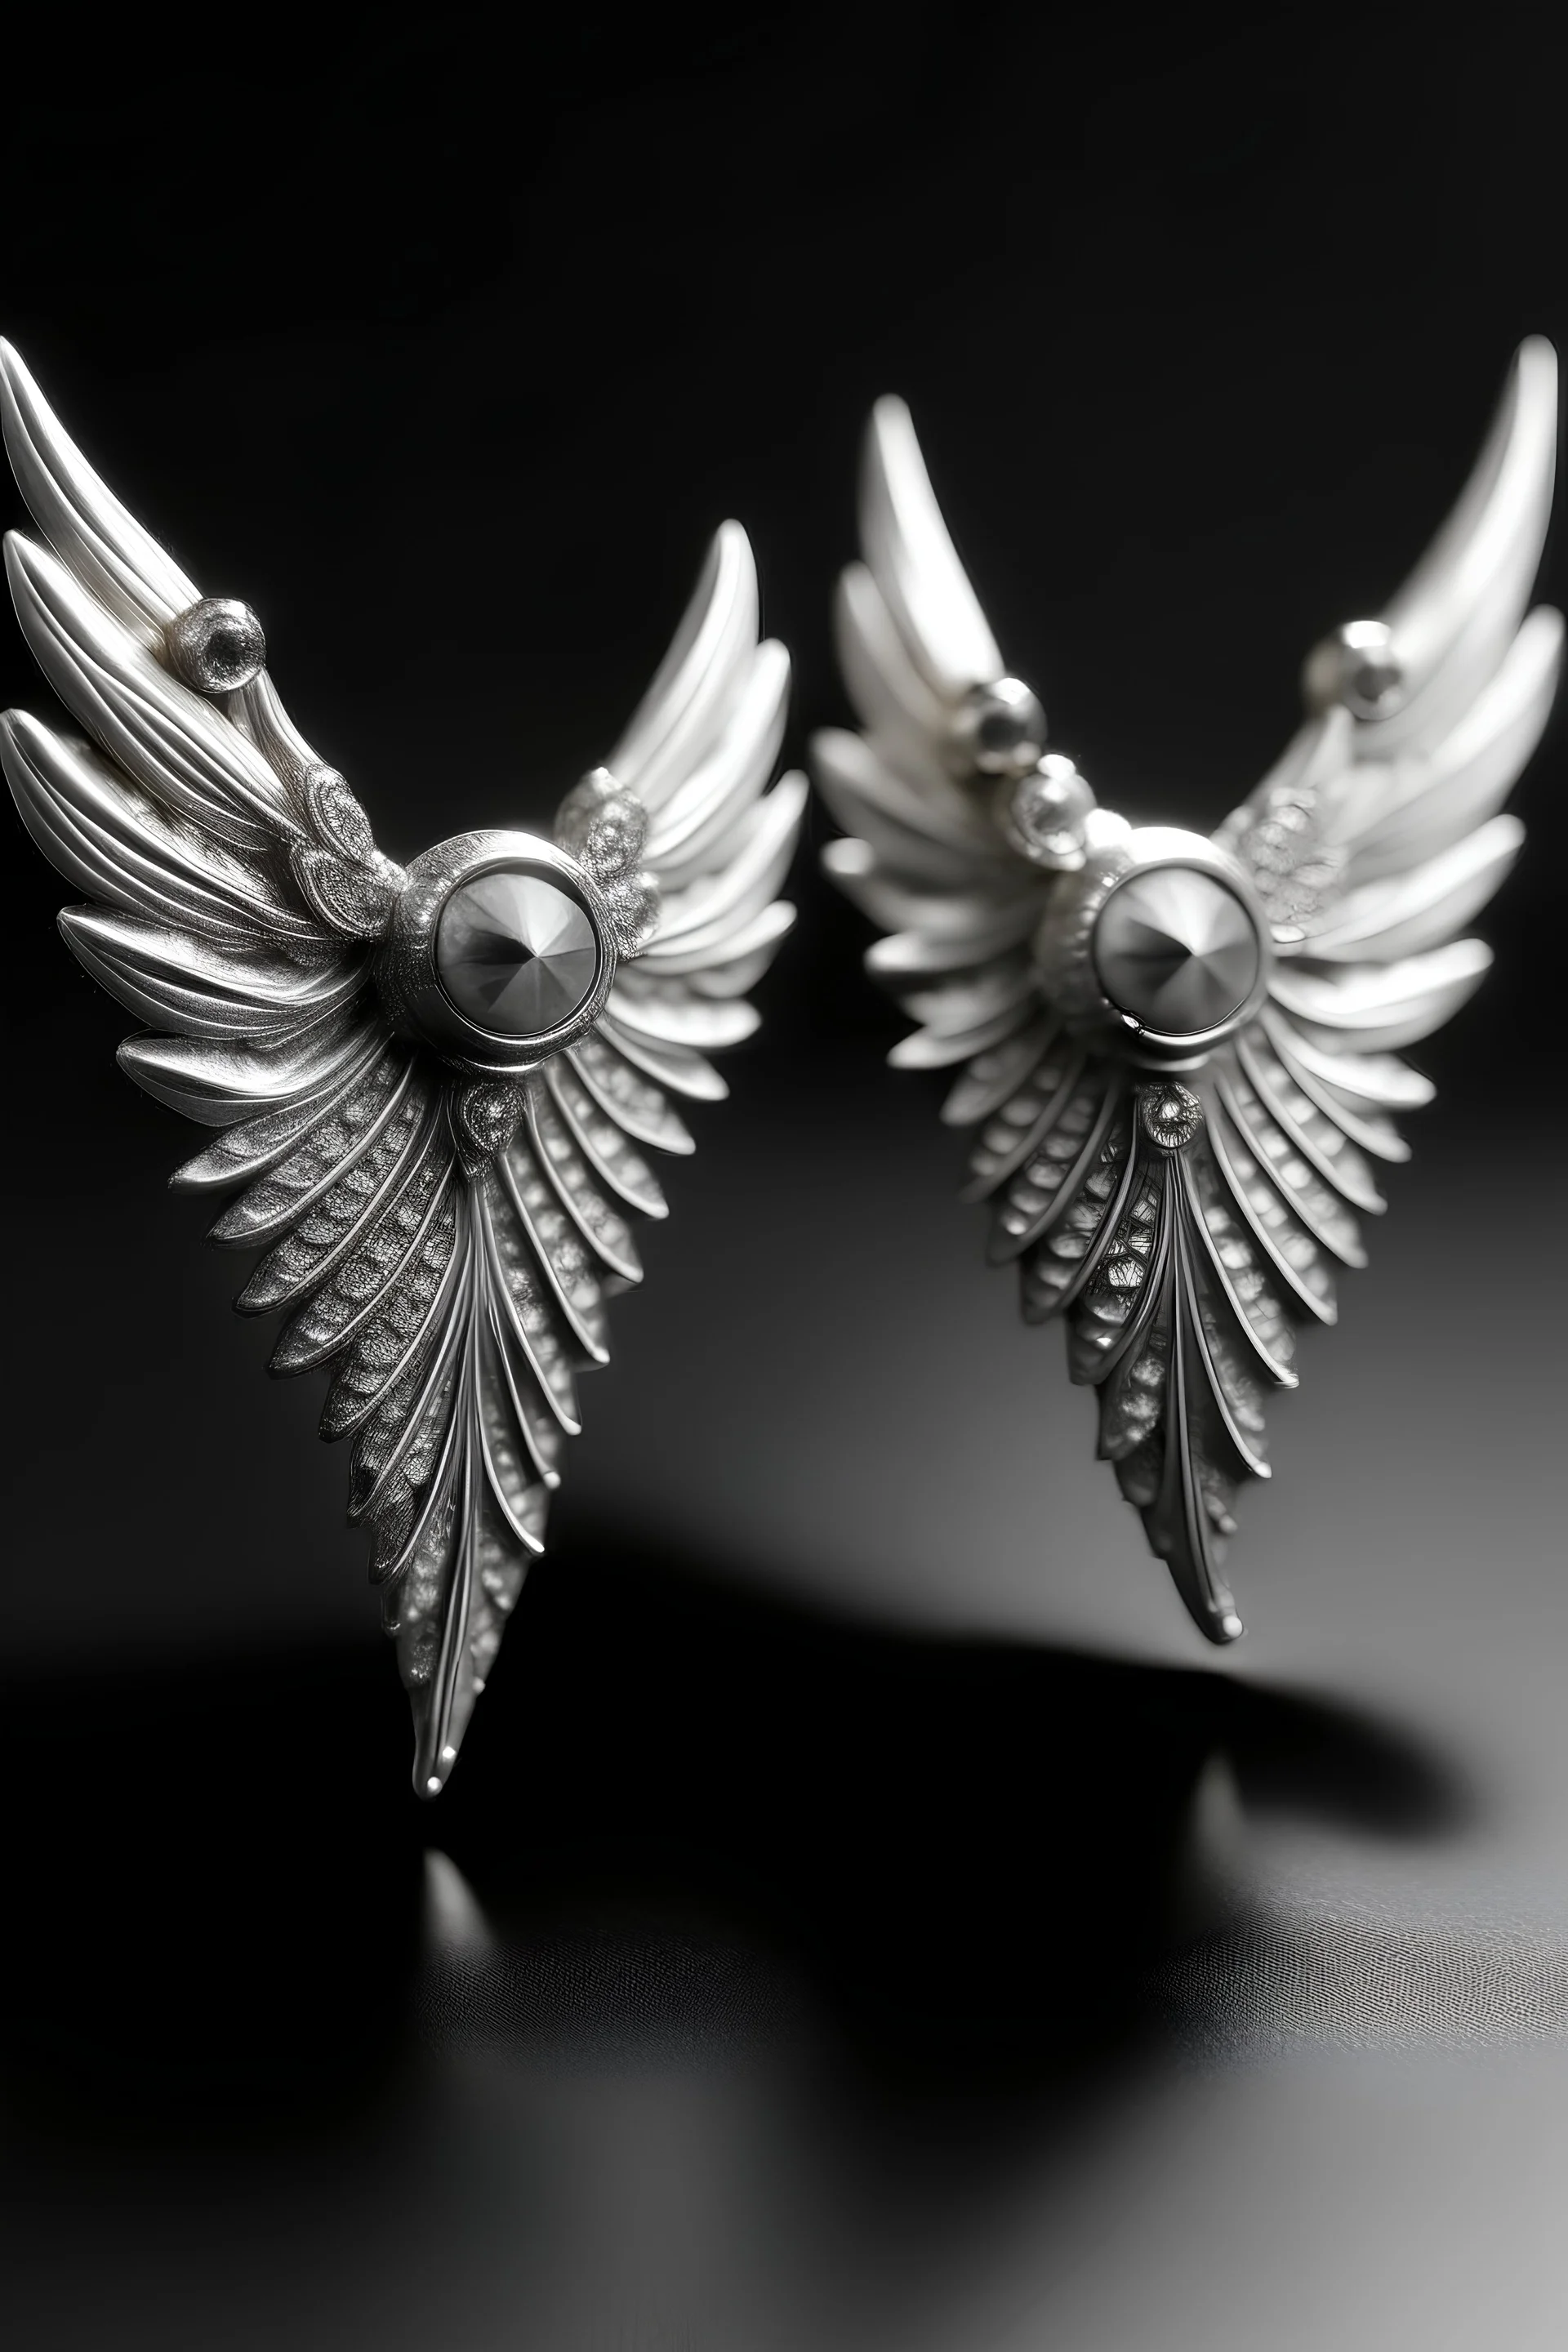 An earring made of silver and diamonds shaped like a valkyrie wings